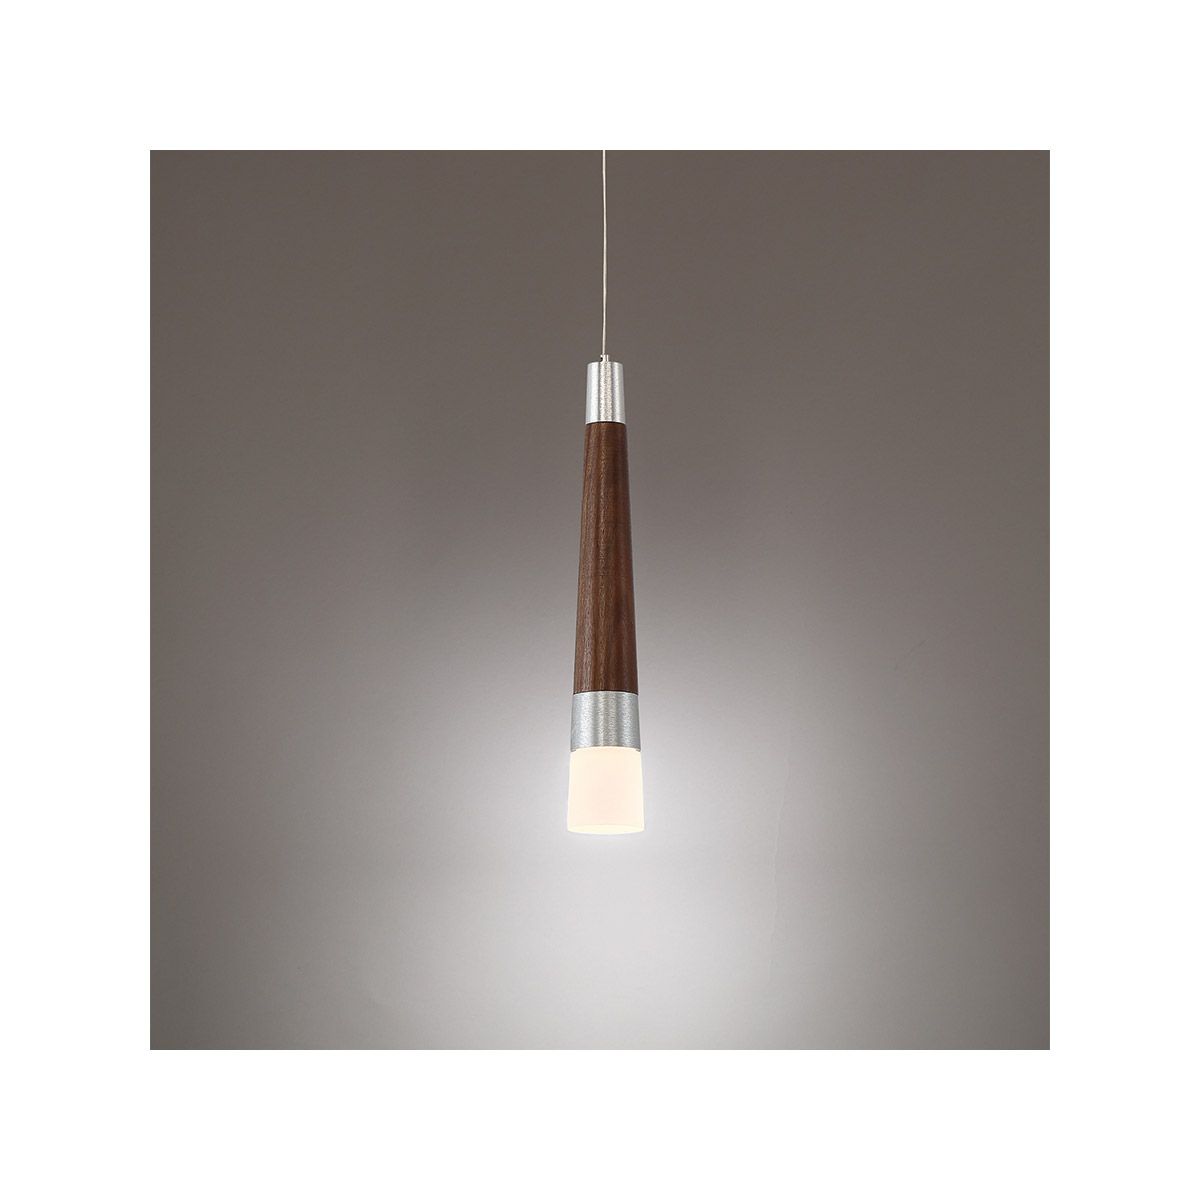 Padron 2 in. LED Pendant Light Brown Finish